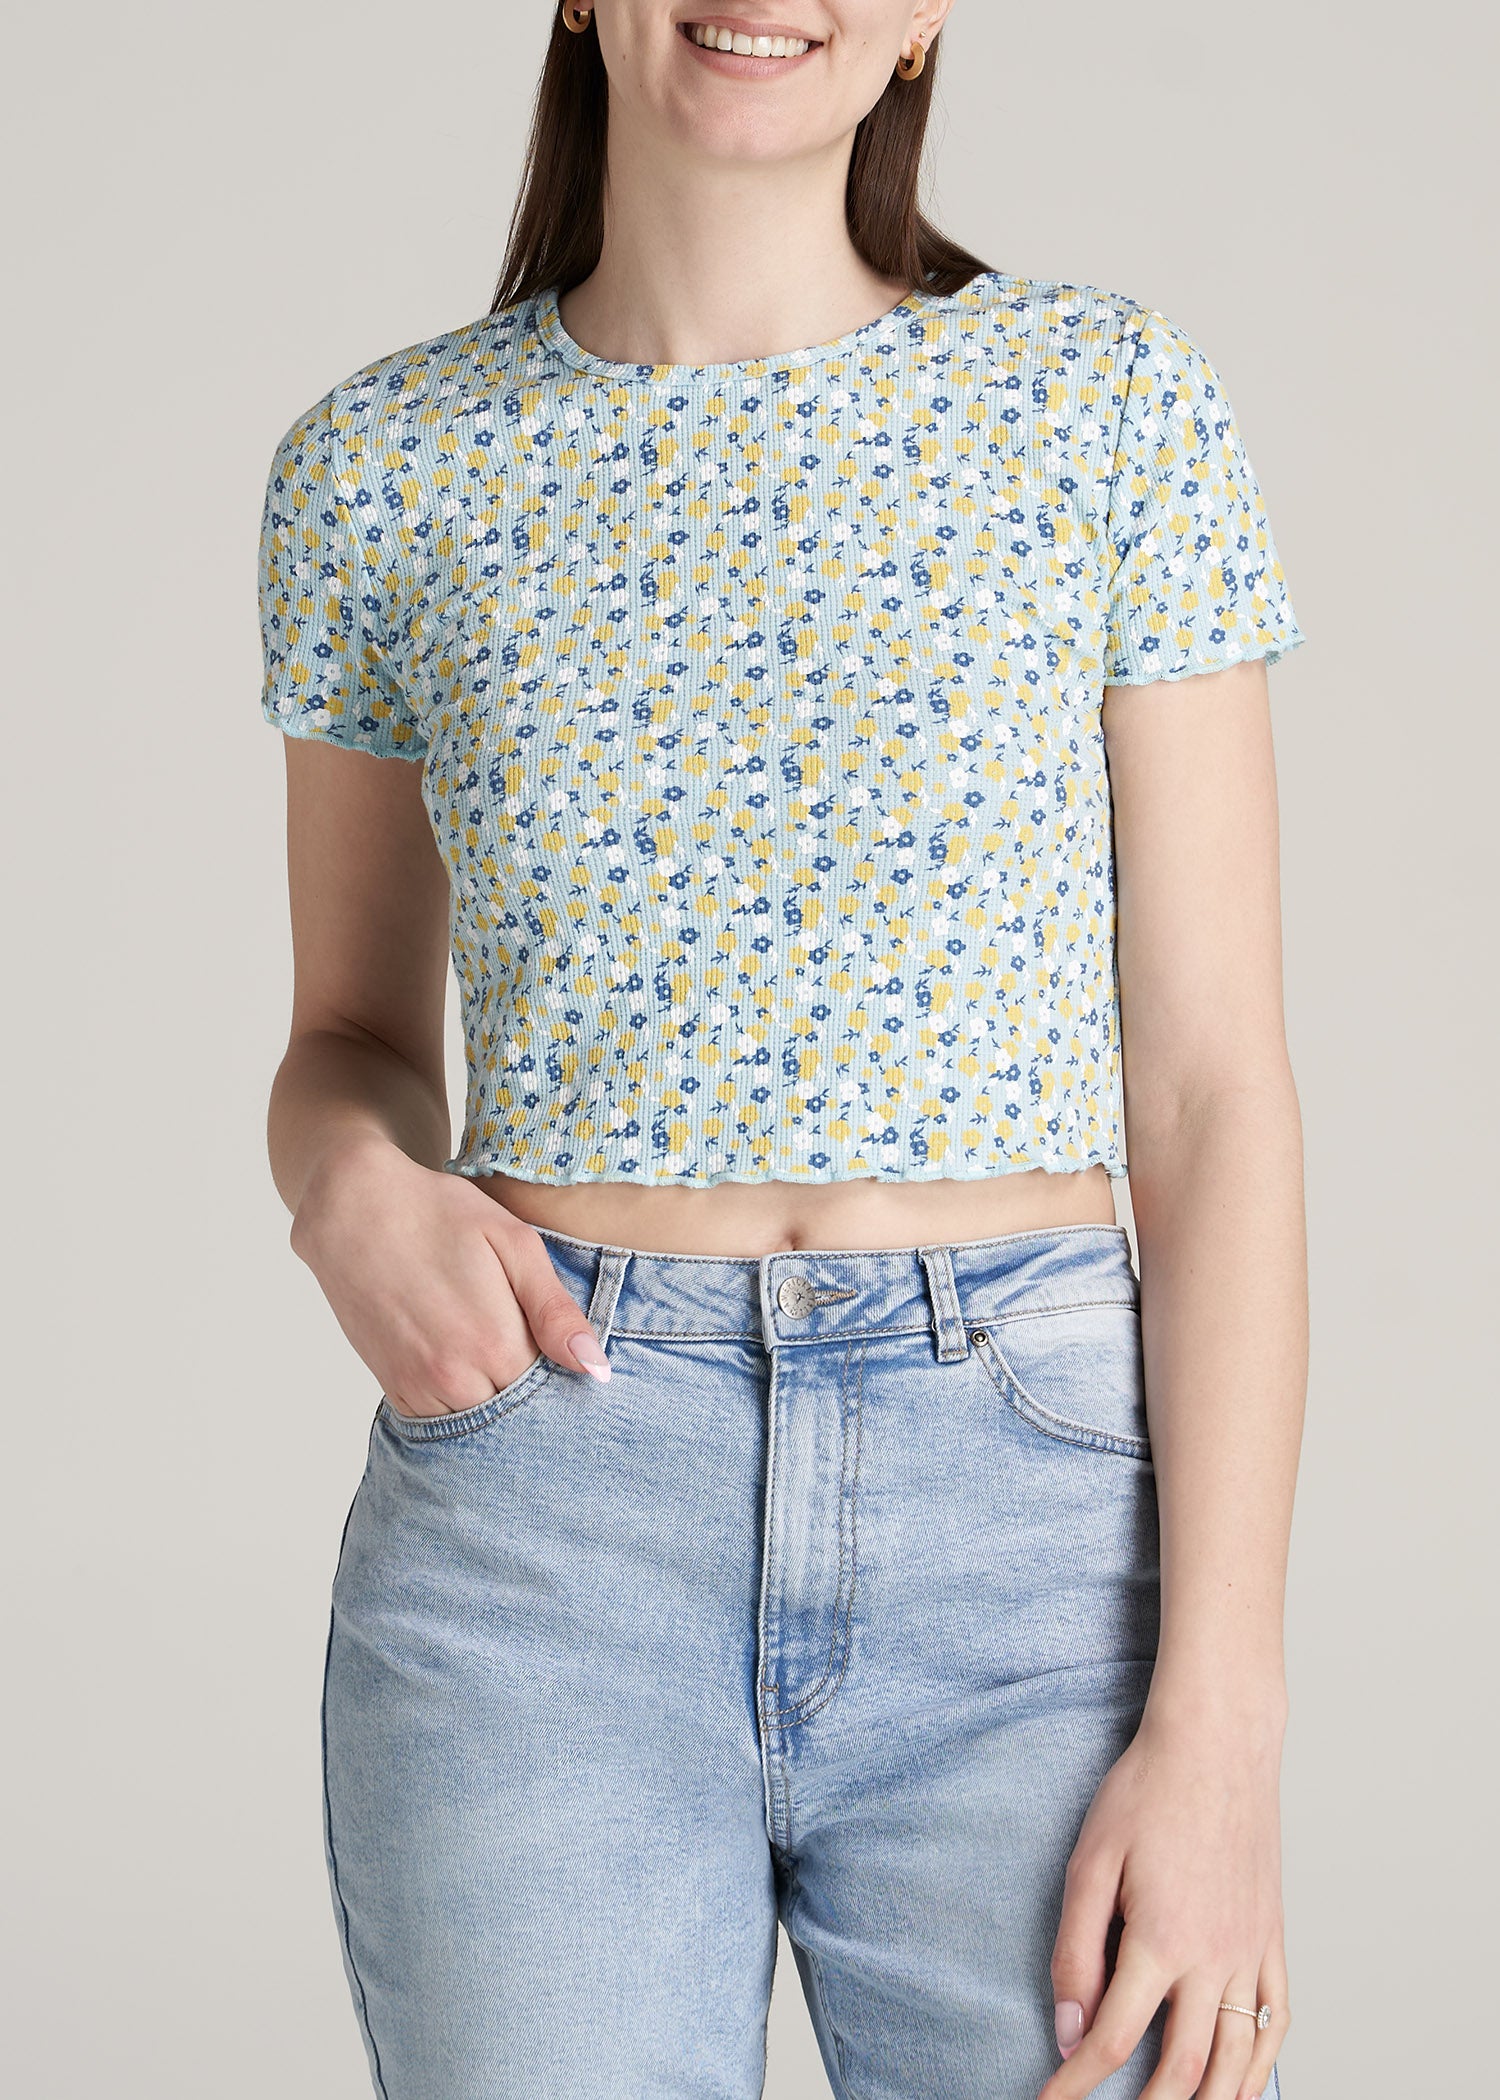 Women's Cropped Tops